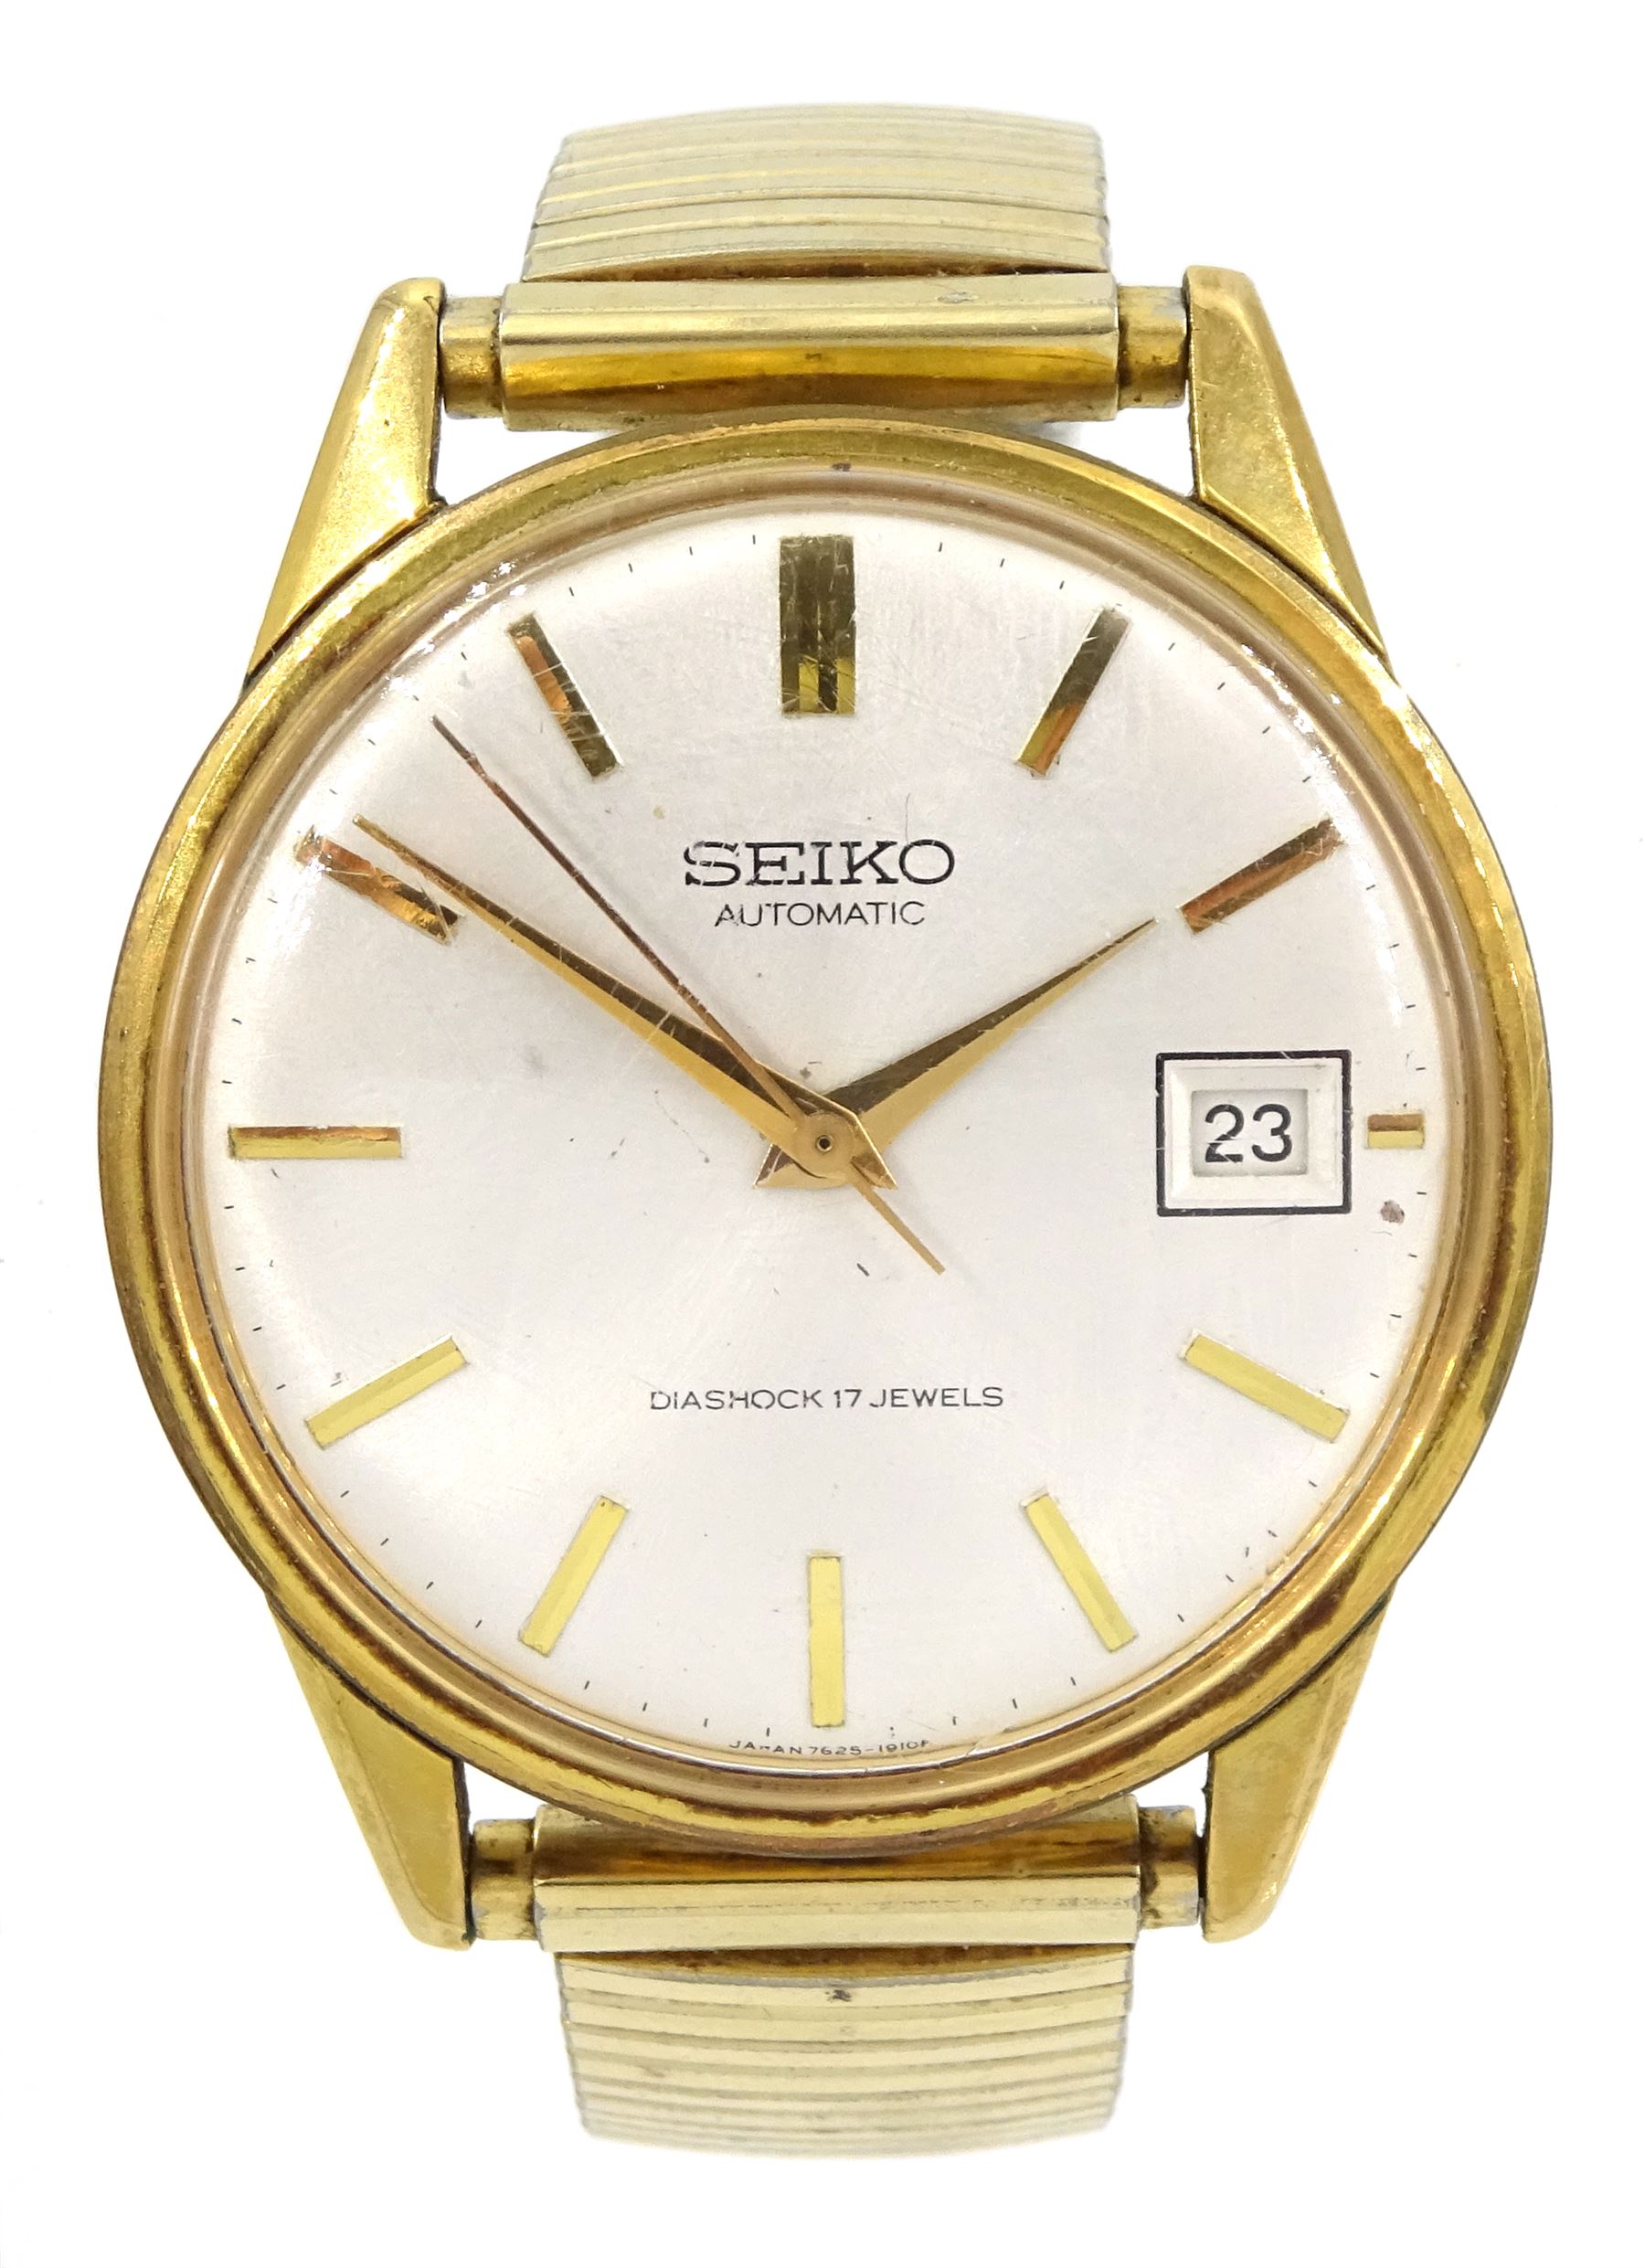 DS Seiko gentleman's automatic gold-plated and stainless steel wristwatch,  model No. 7625-1990, on expanding gilt st - Jewellery, Watches & Silver